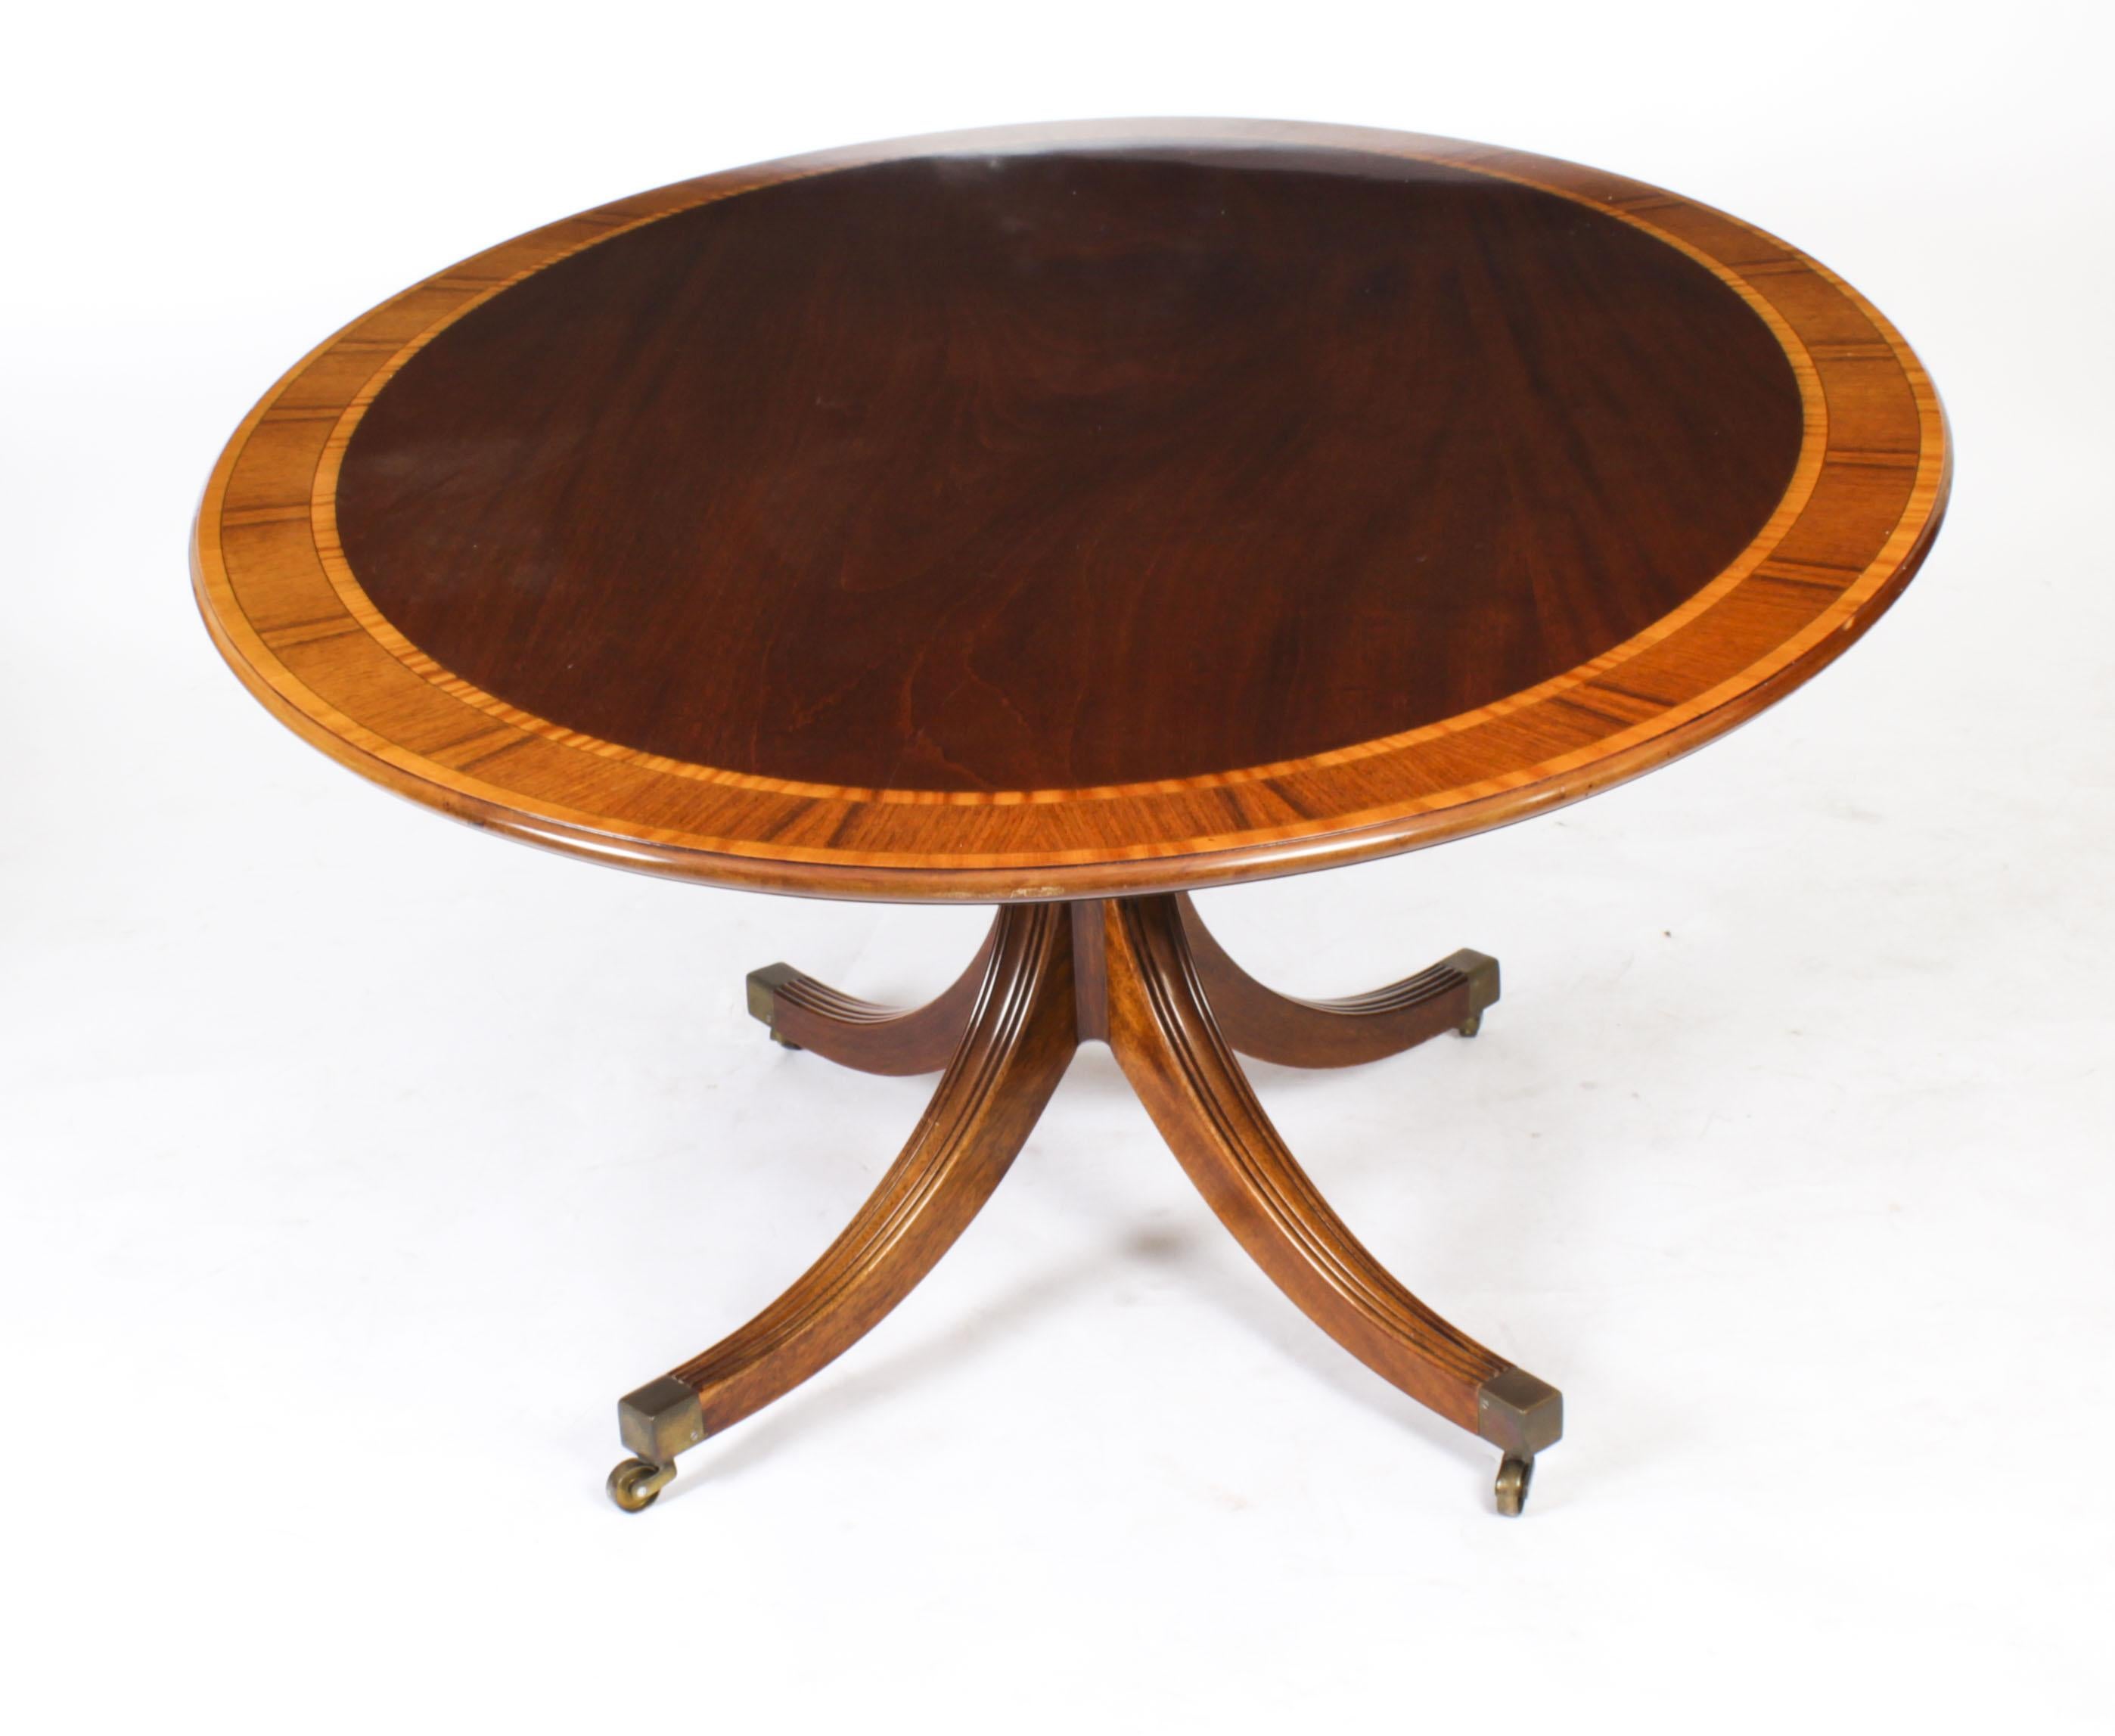 English Vintage Oval Mahogany Dining Table by William Tillman, 20th Century